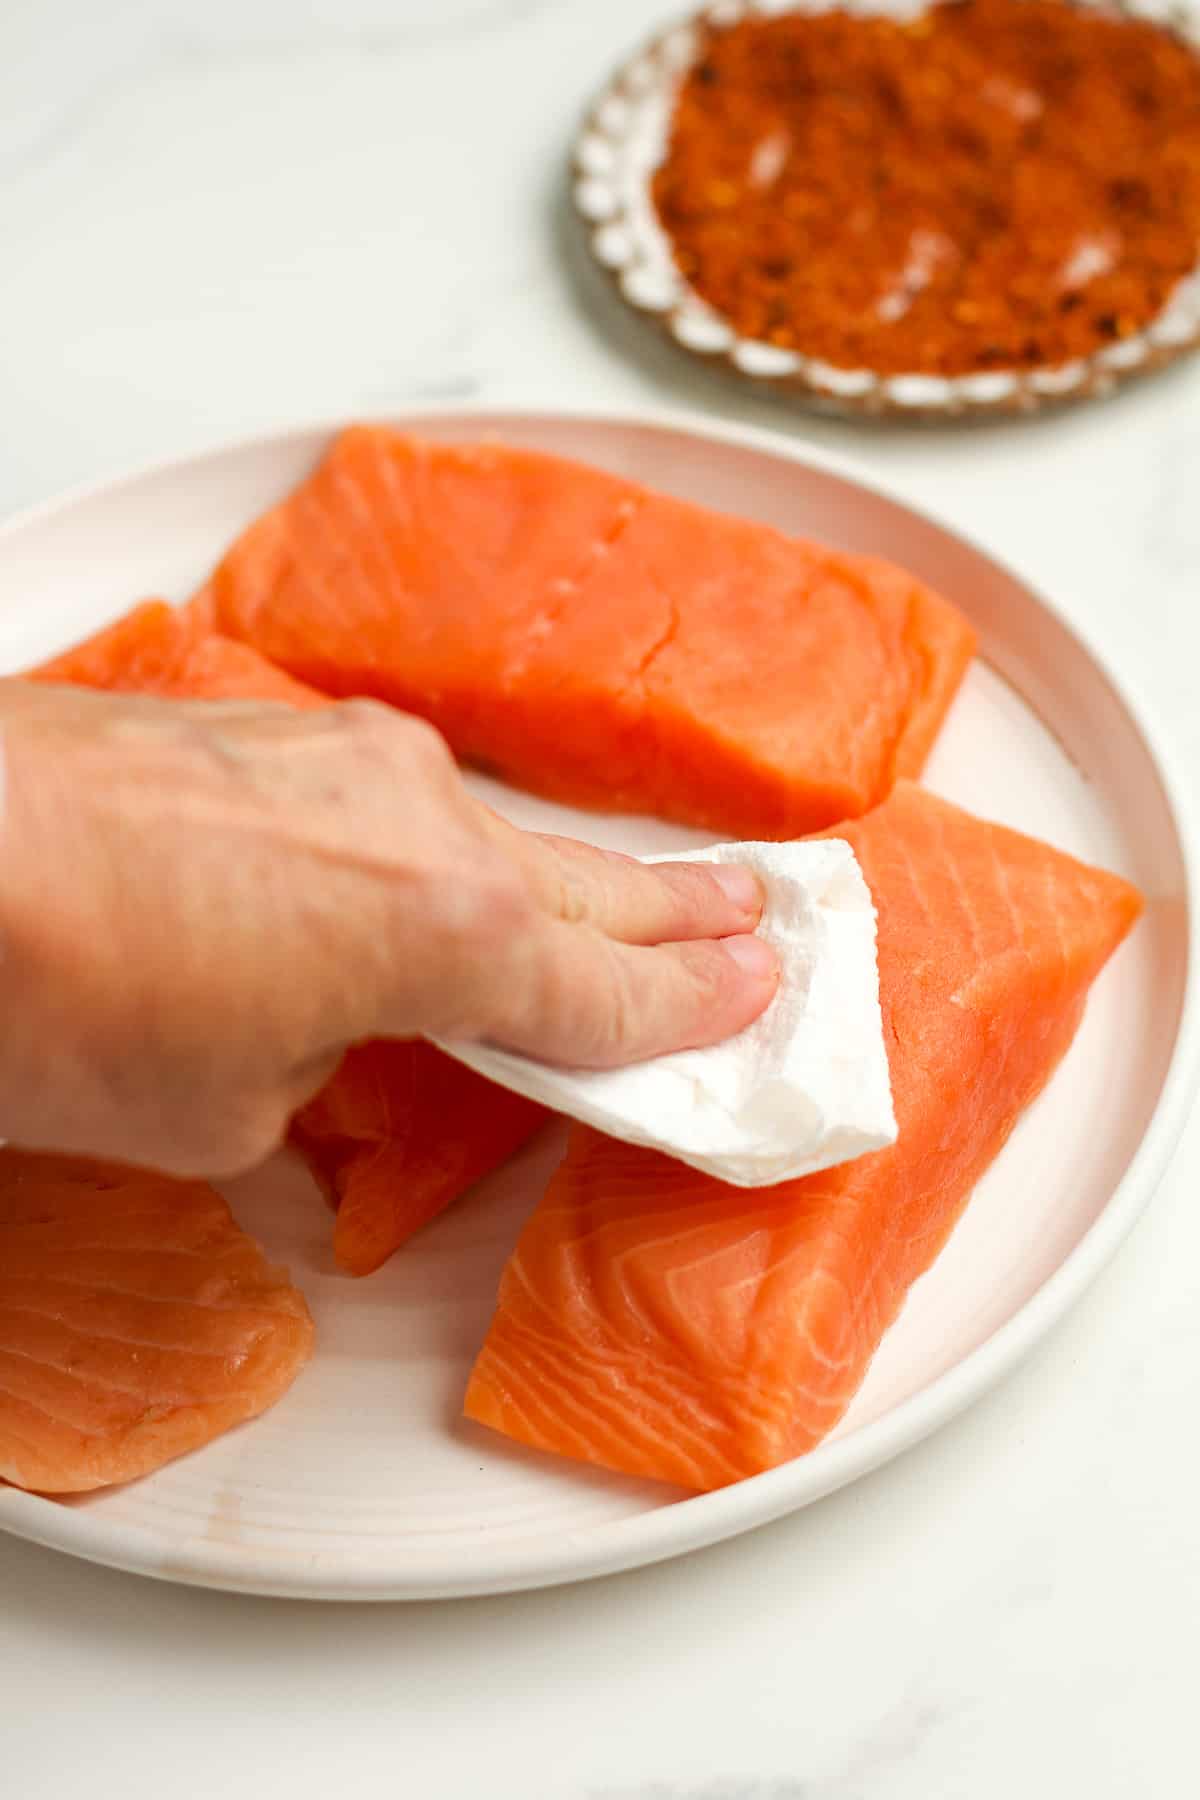 A hand drying off the salmon with paper towel.